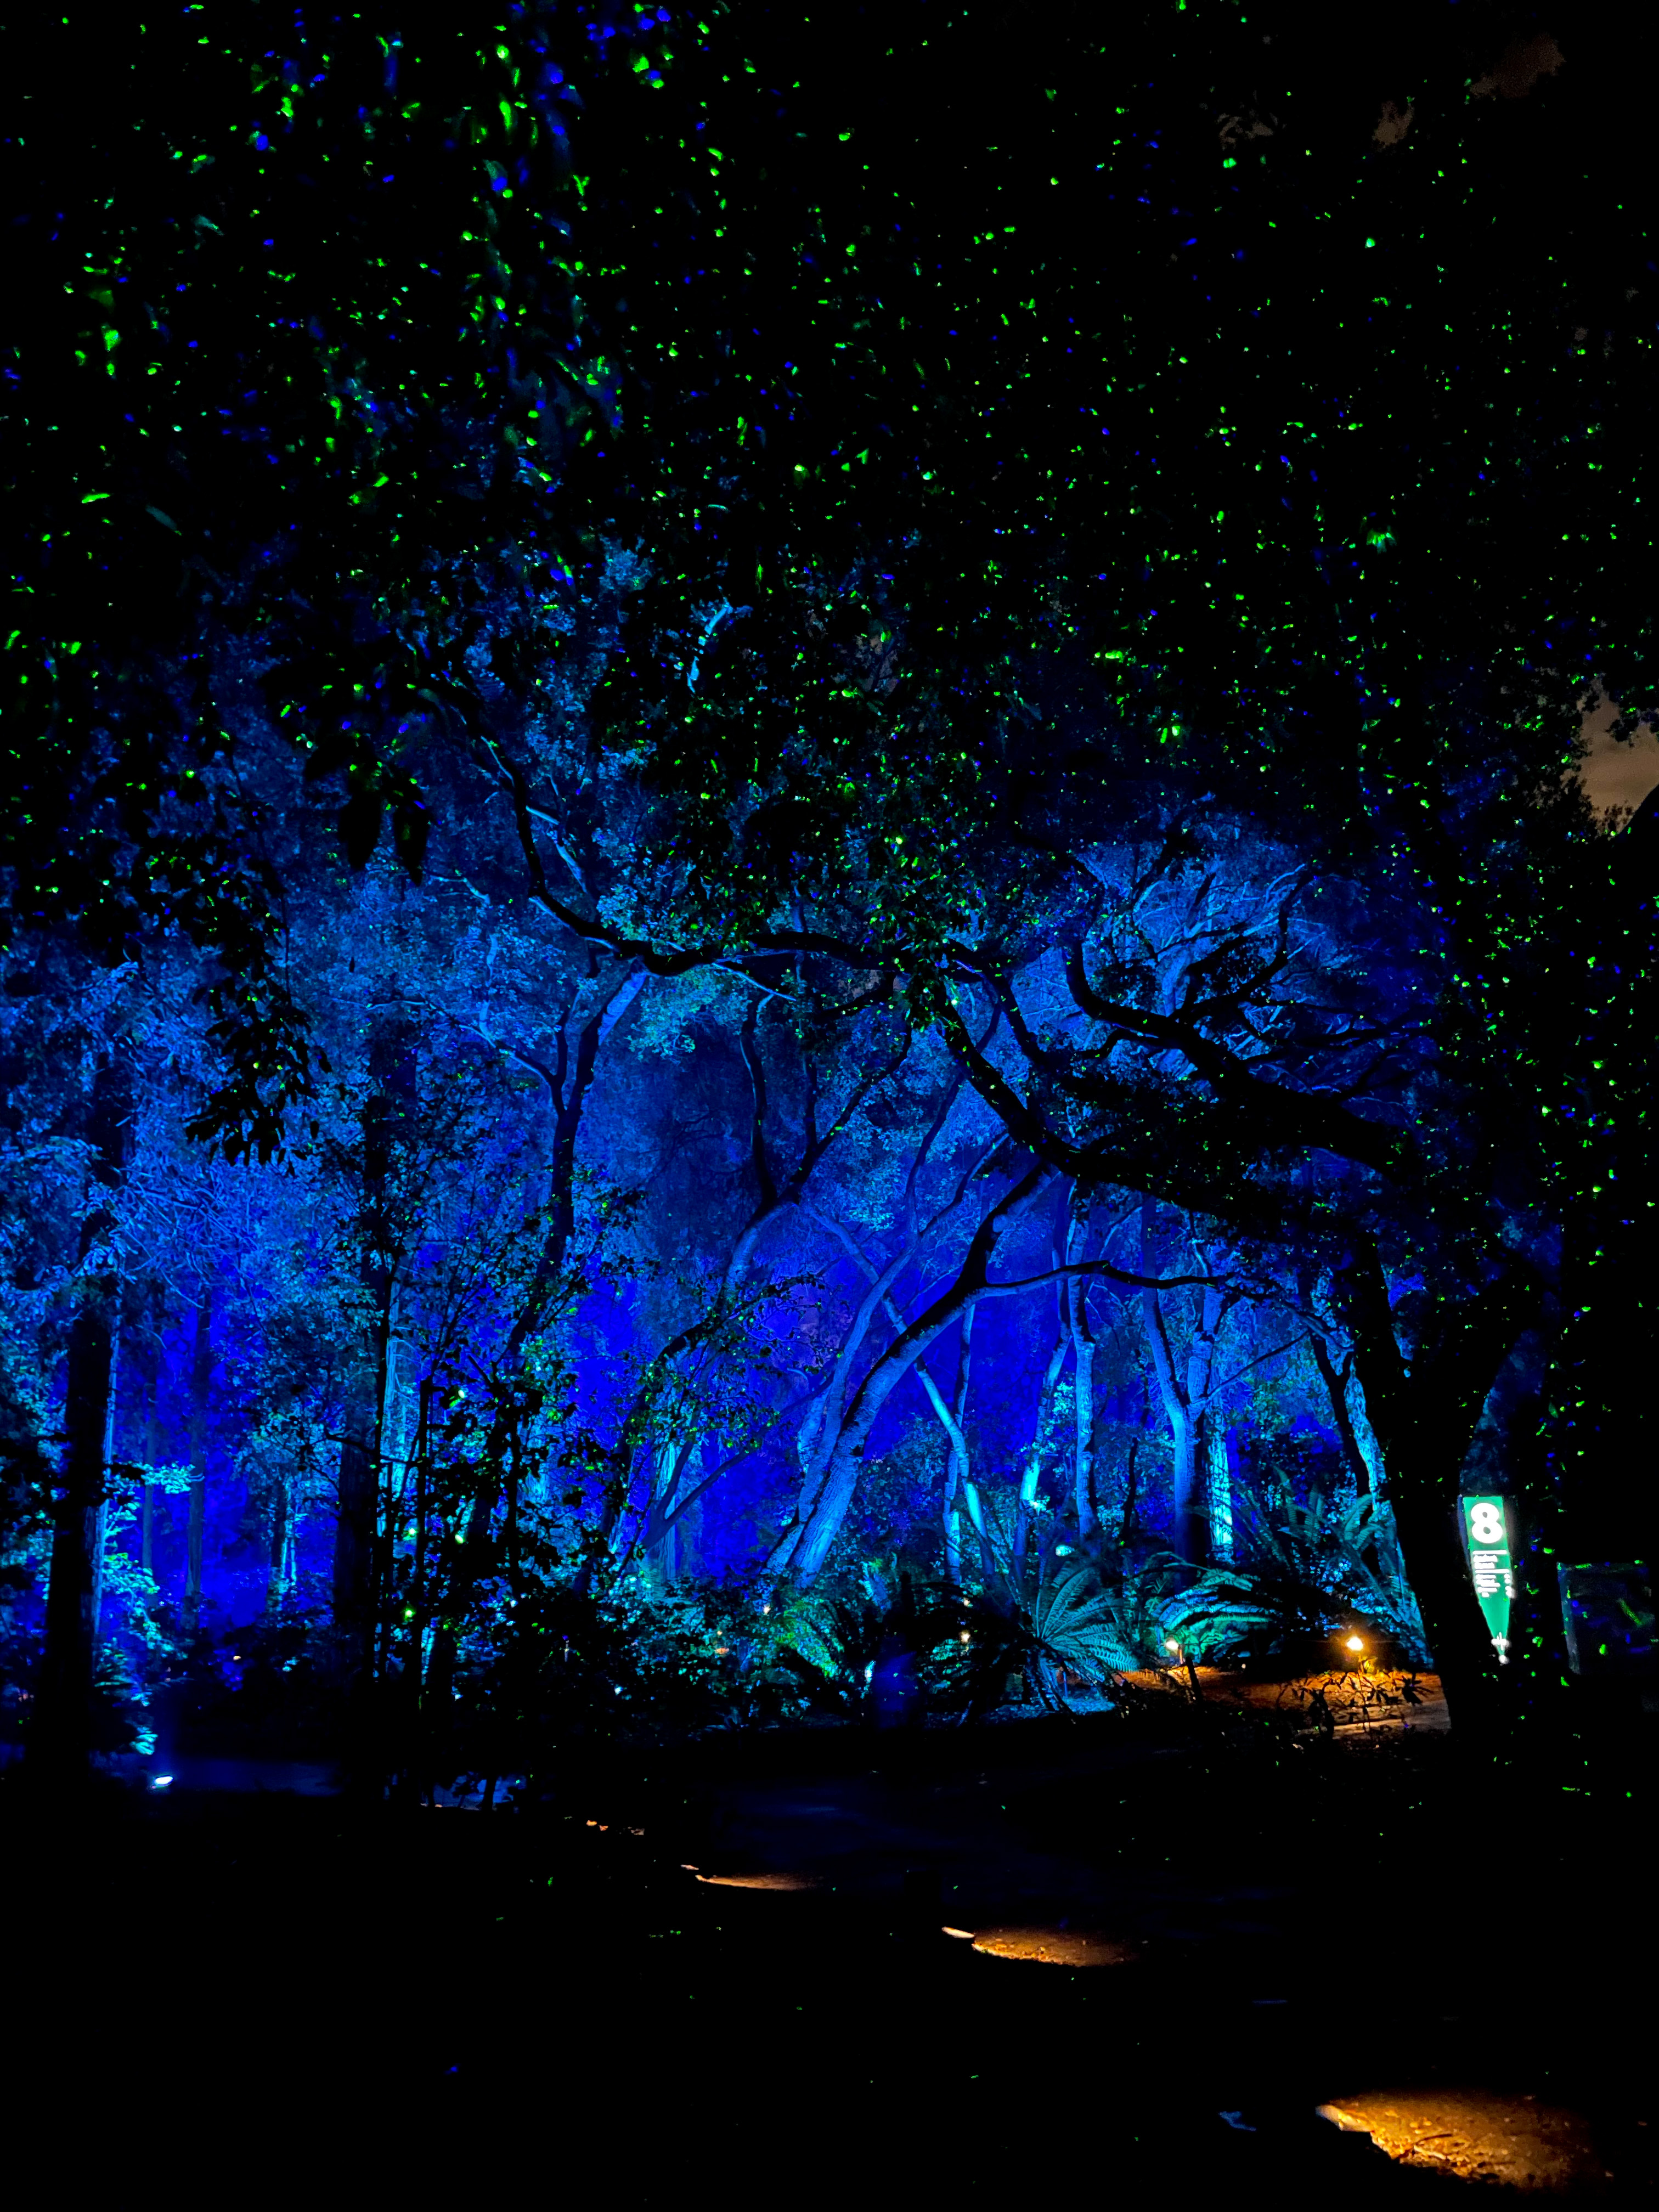 Descanso Gardens’ Enchanted Forest of Light